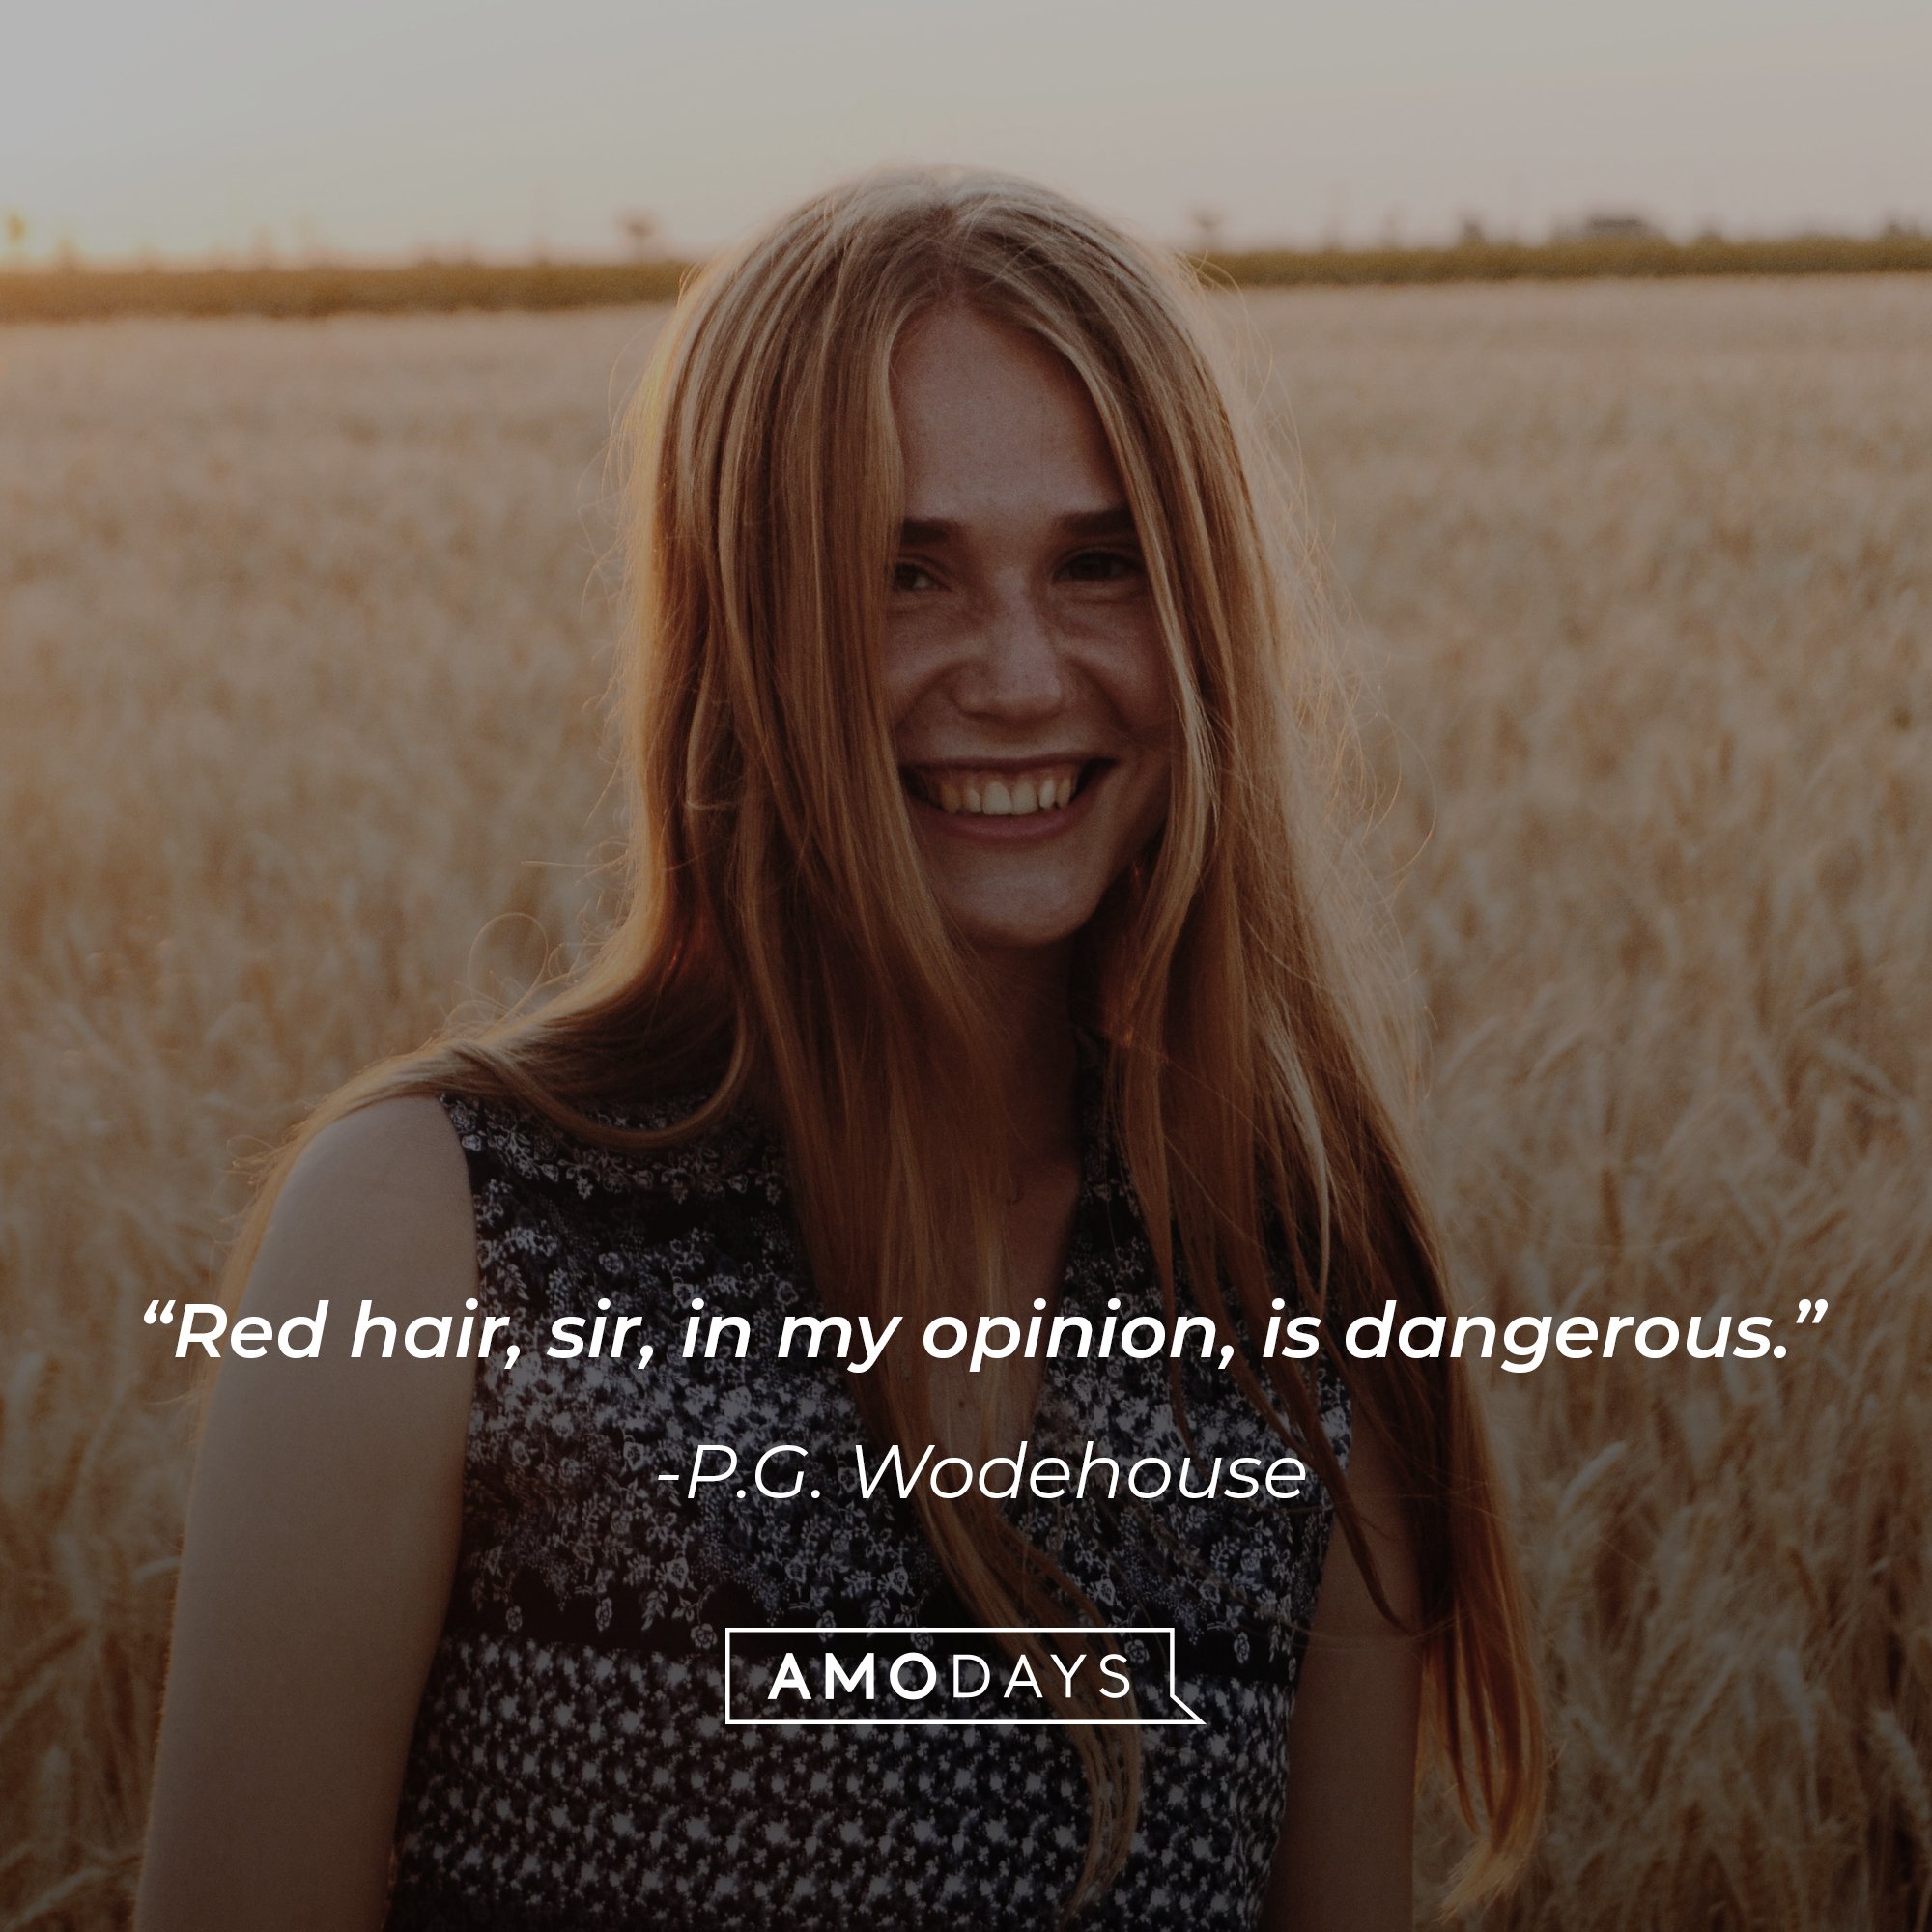 P.G. Wodehouse’s quote: “Red hair, sir, in my opinion, is dangerous.” | Image: AmoDays